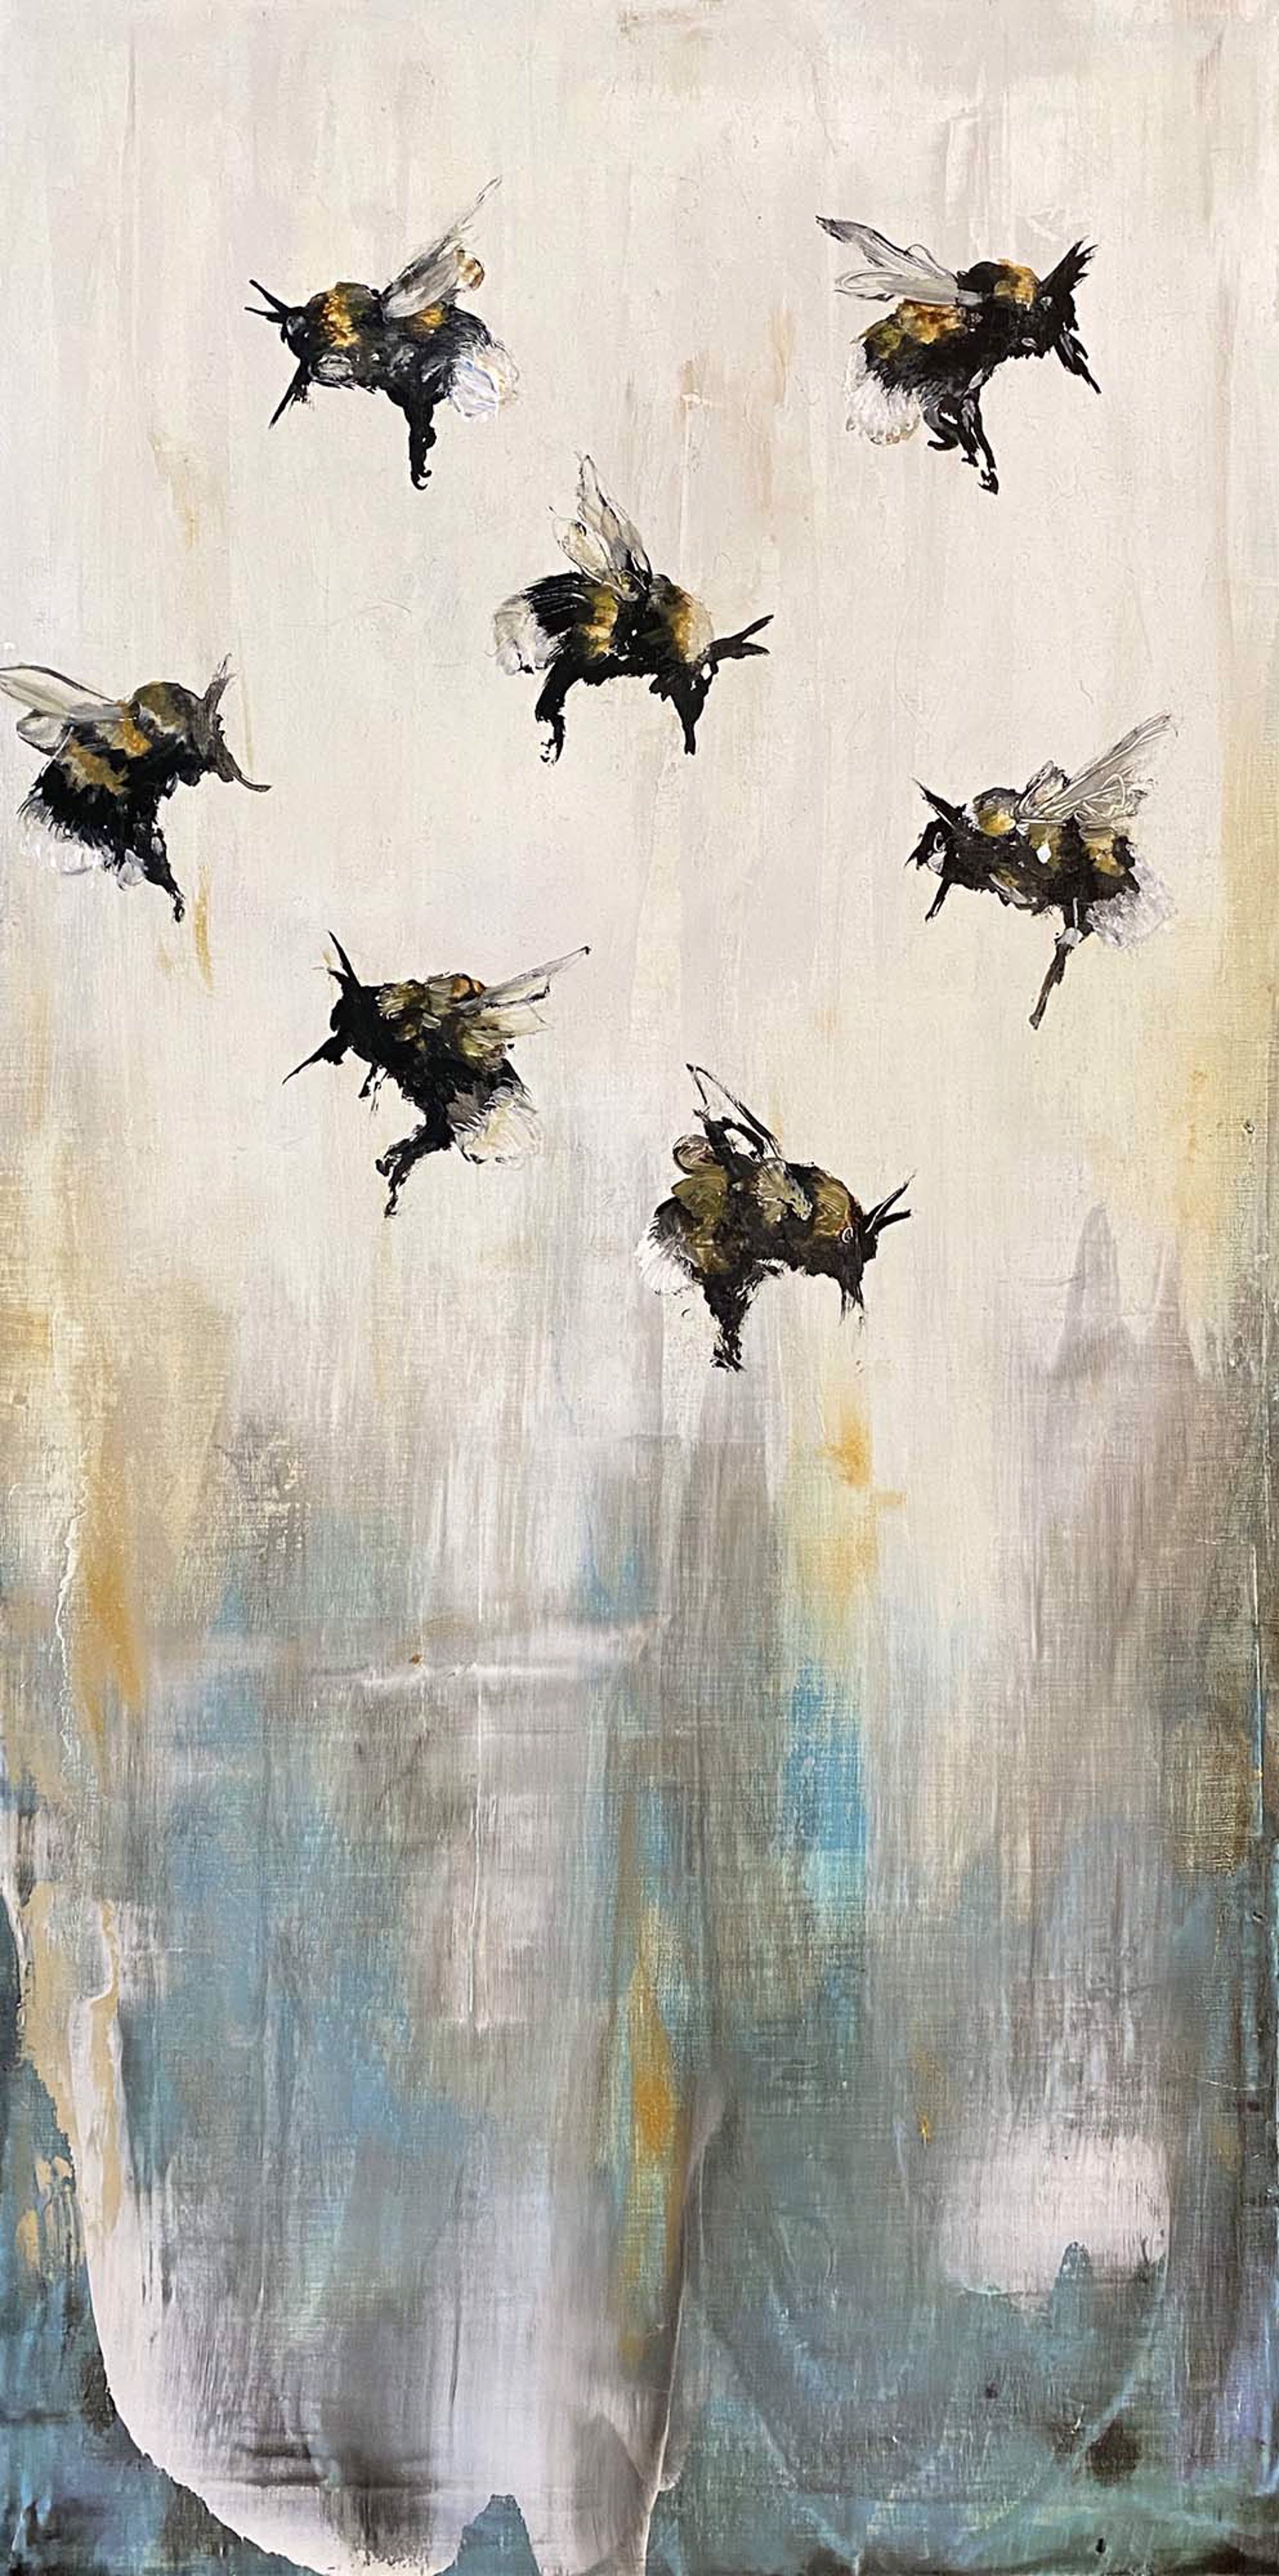 Original Oil Painting Of Seven Bees On An Abstract Gray Yellow White And Blue Background, By Jenna Von Benedikt